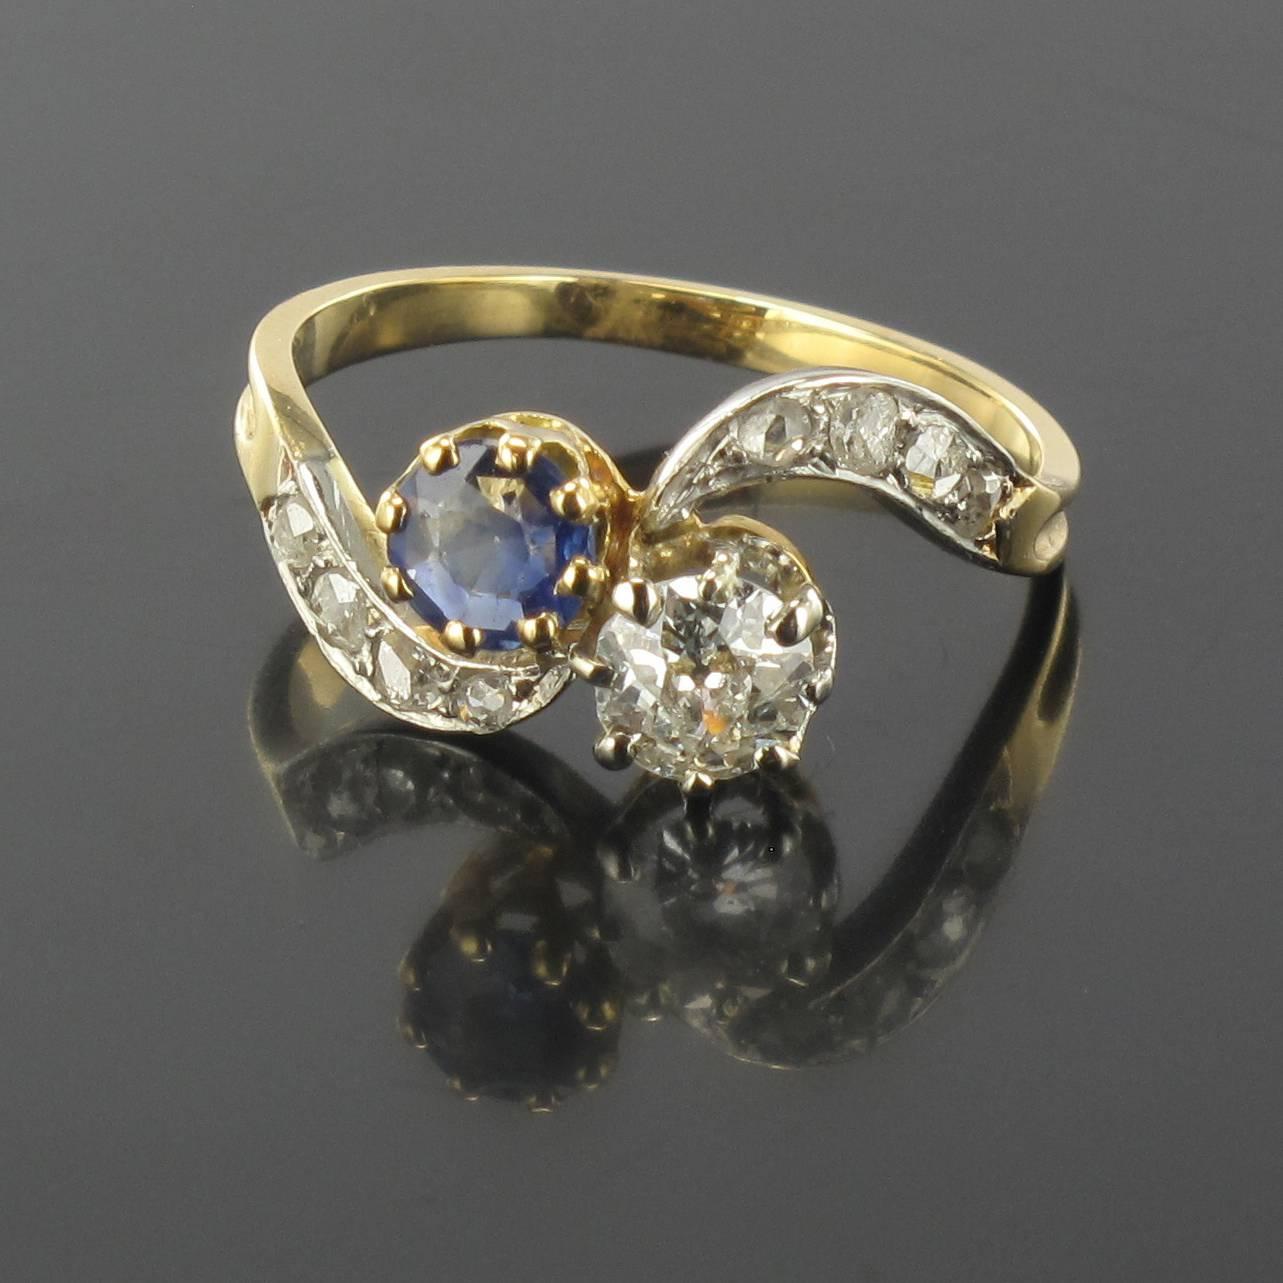 Ring in 18 carat yellow gold, eagle head hallmark. 

This Lovers ring is claw set with a brilliant cut diamond and a round blue sapphire. The beginning of the ring band at each side is set with a curve of 4 rose cut diamonds.

Weight of the